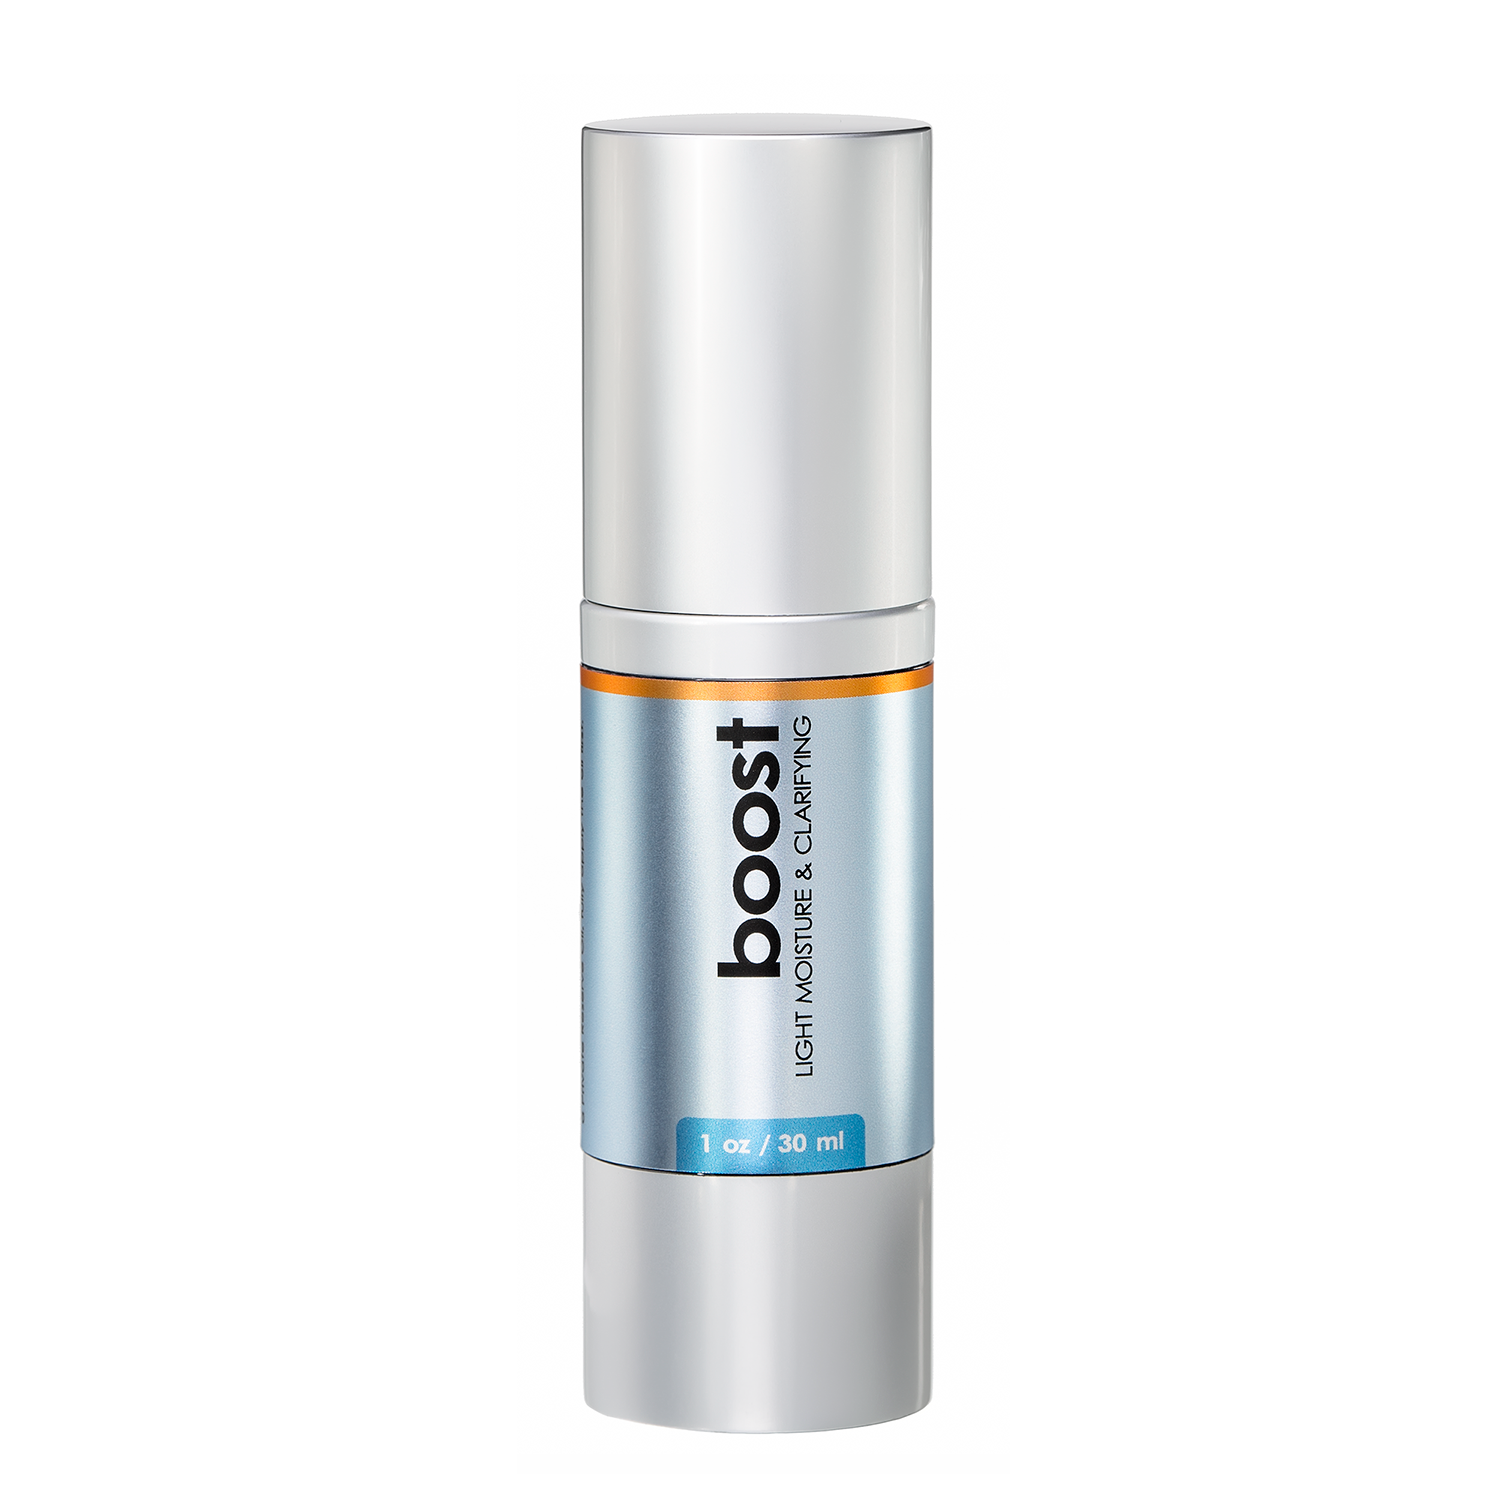 Bottle of Boost Daily Clarifying Moisturizer by Your Best Face